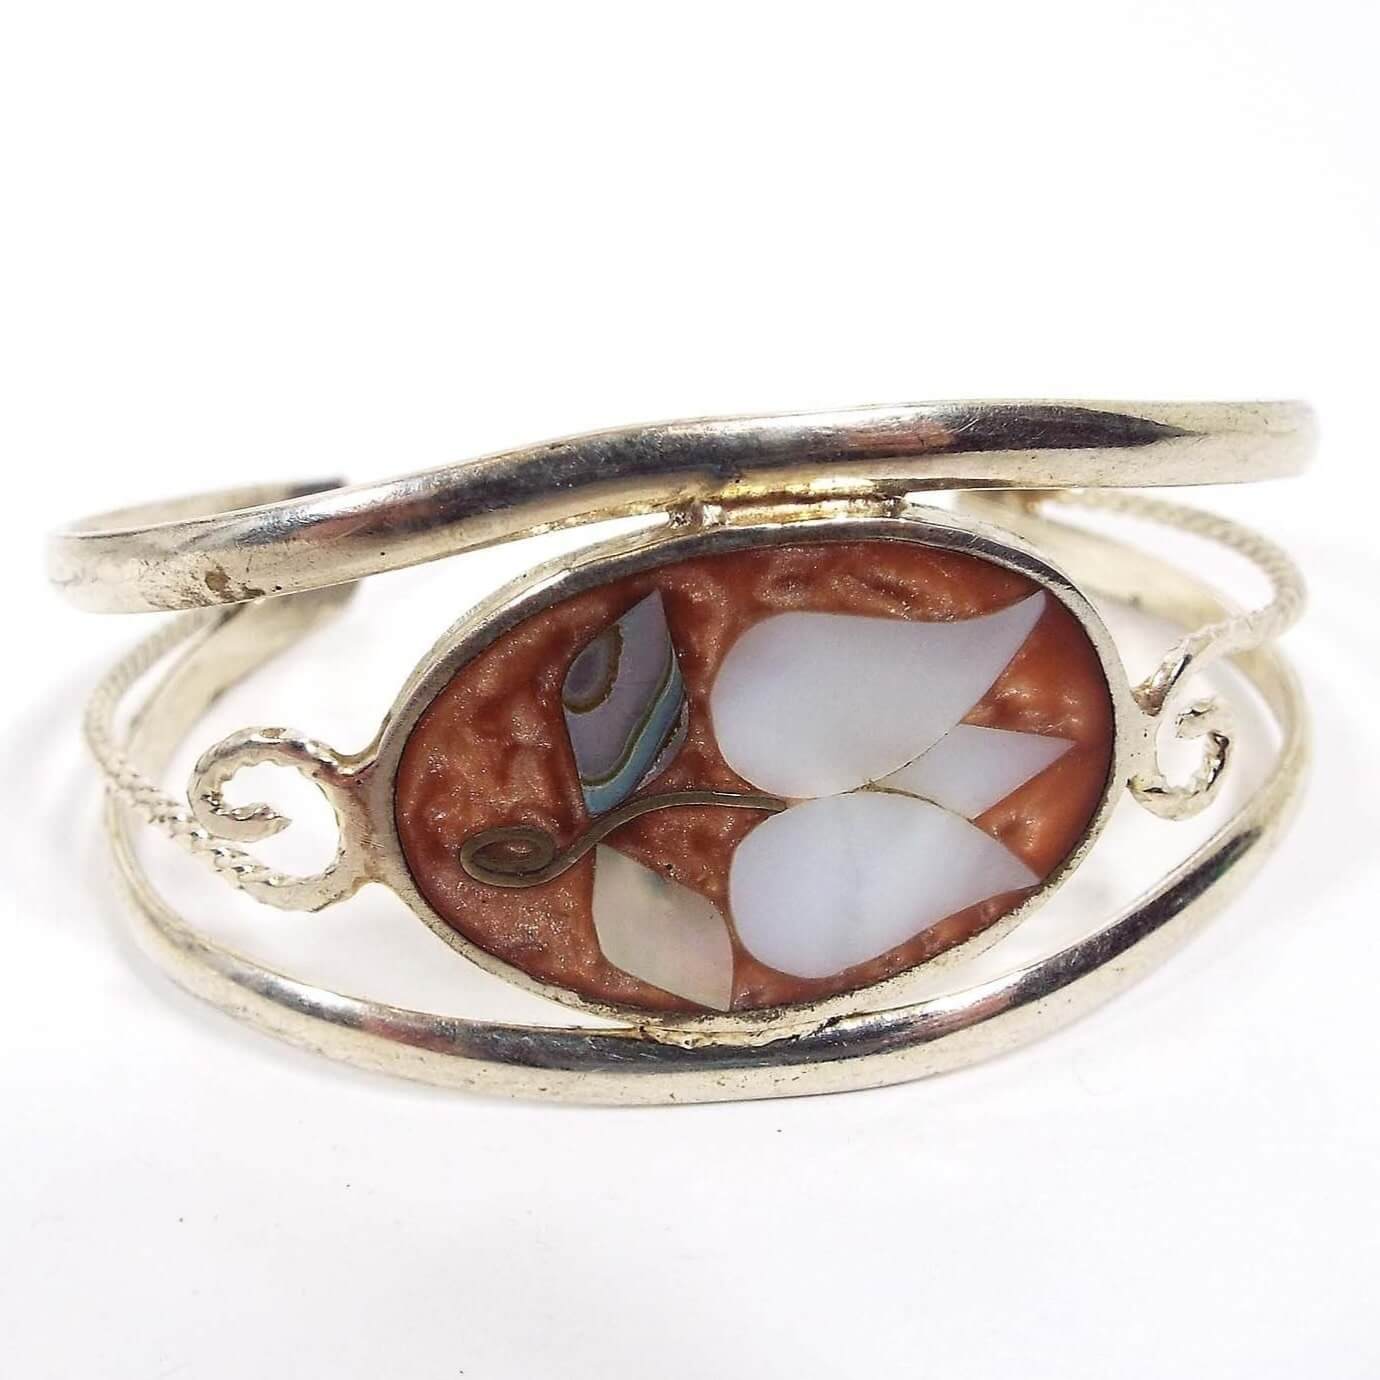 Picture of the front of the Alpaca cuff bracelet. Middle of the bracelet has a large oval with dark pearly peach color resin. Inside the resin is a flower design with mother of pearl petals and abalone shell leaves.It makes the flower petals look white and the rest of the flower multi color. The oval has a band of silver color metal above and below it forming the curved cuff of the bracelet. On each side of the oval is a thinner twisted band of silver color metal that is curved around the sides.